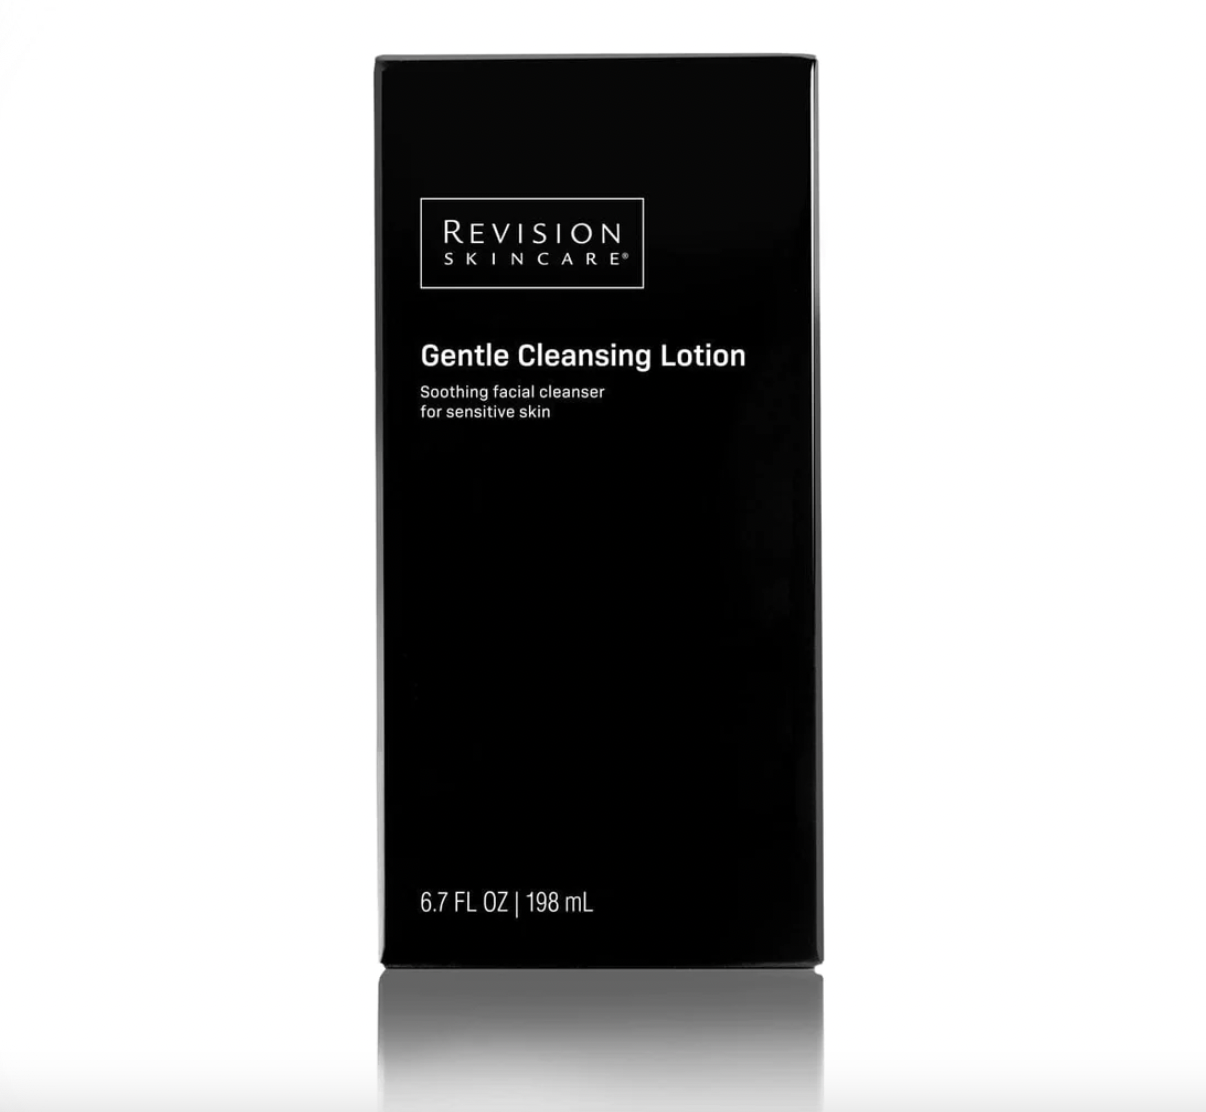 Gentle Cleansing Lotion 6.7 fl oz